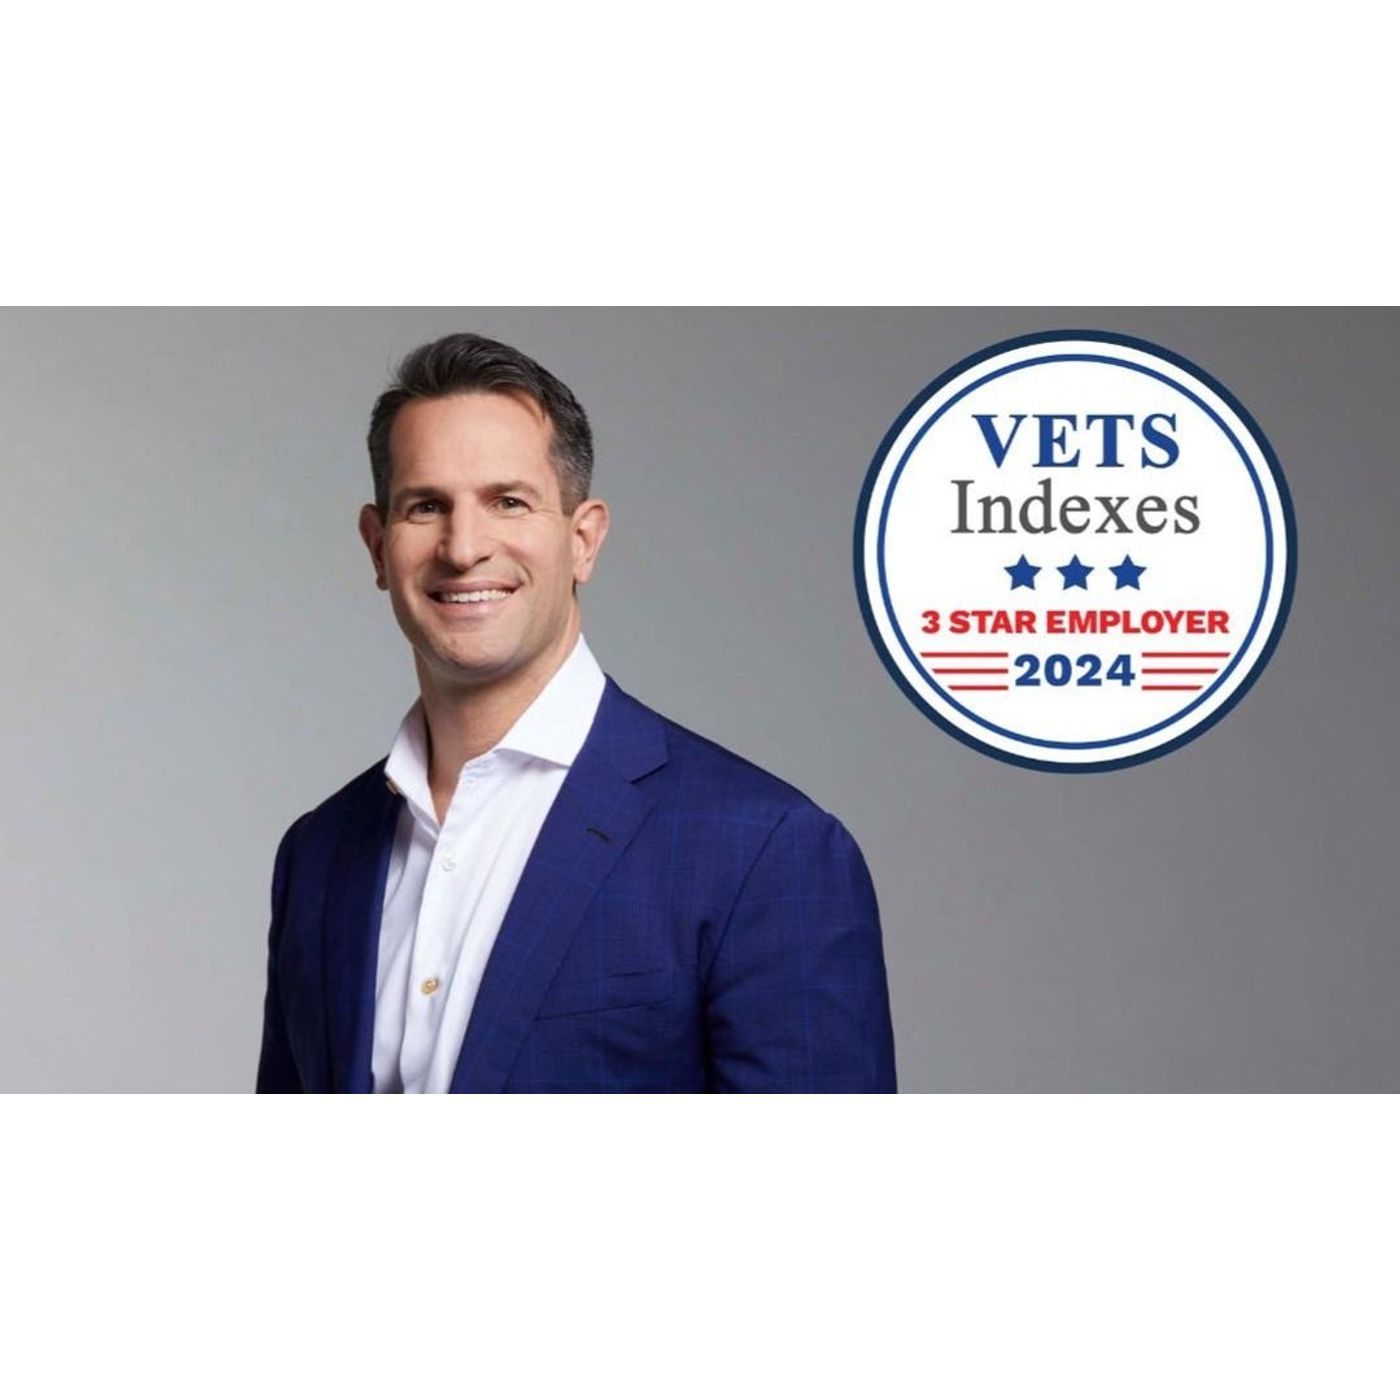 Berry Law Honored as a 2024 VETS Indexes 3-Star Employer - Law Firm Newswire